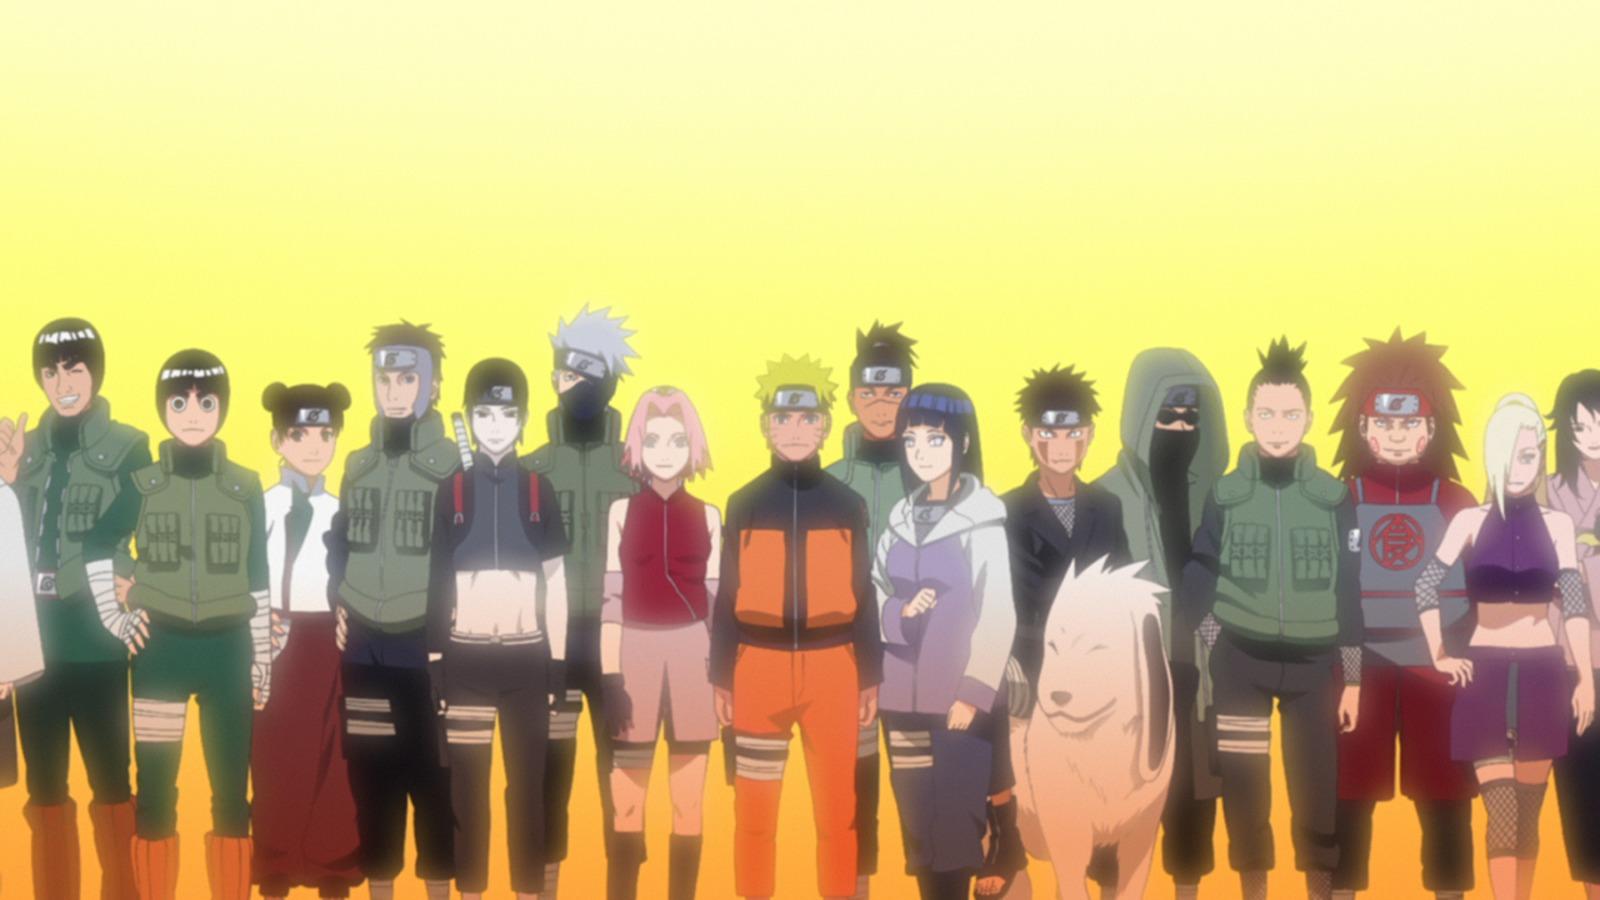 An image of the major characters in Naruto